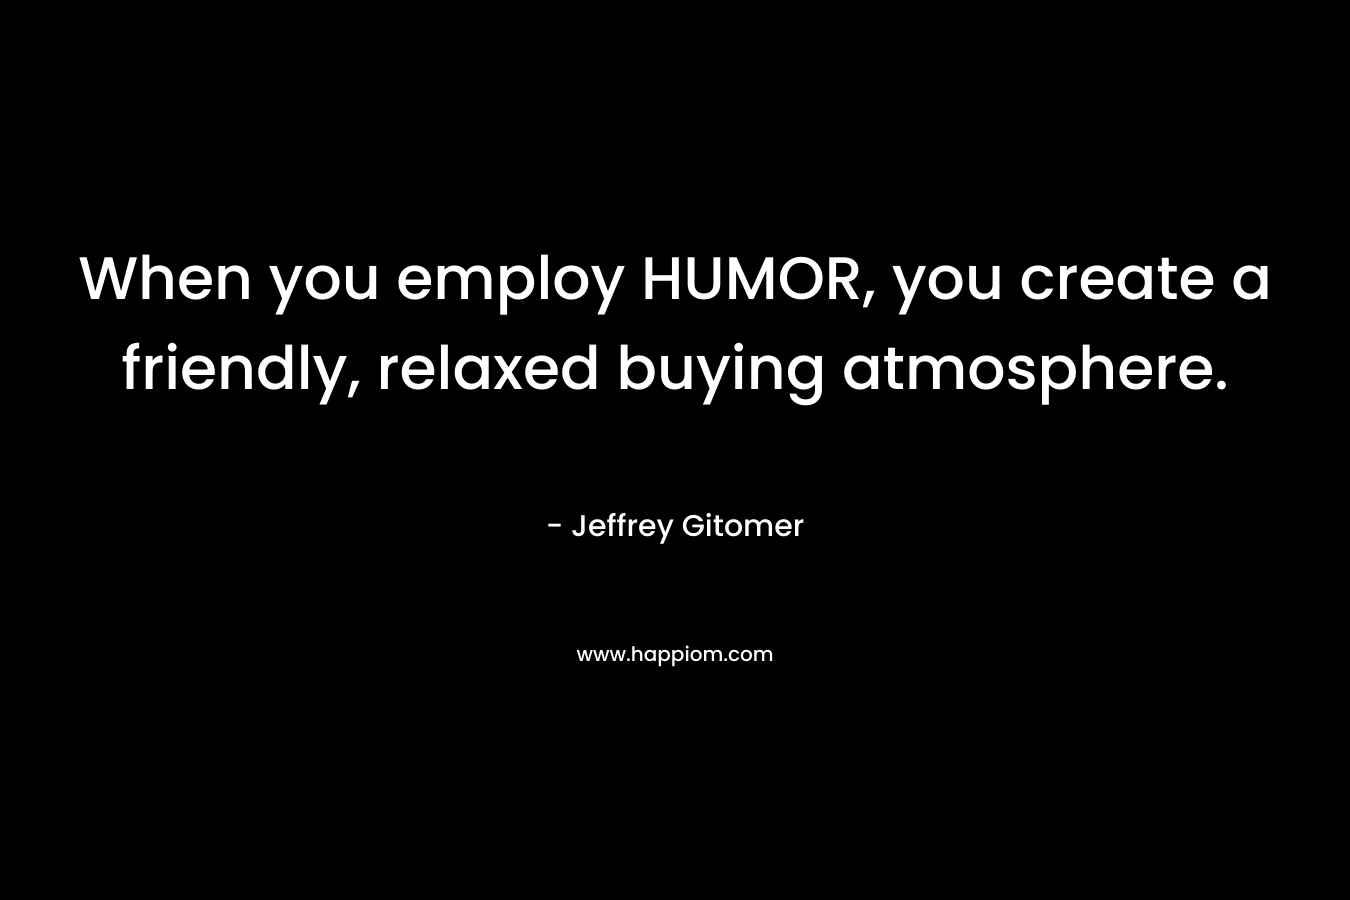 When you employ HUMOR, you create a friendly, relaxed buying atmosphere. – Jeffrey Gitomer